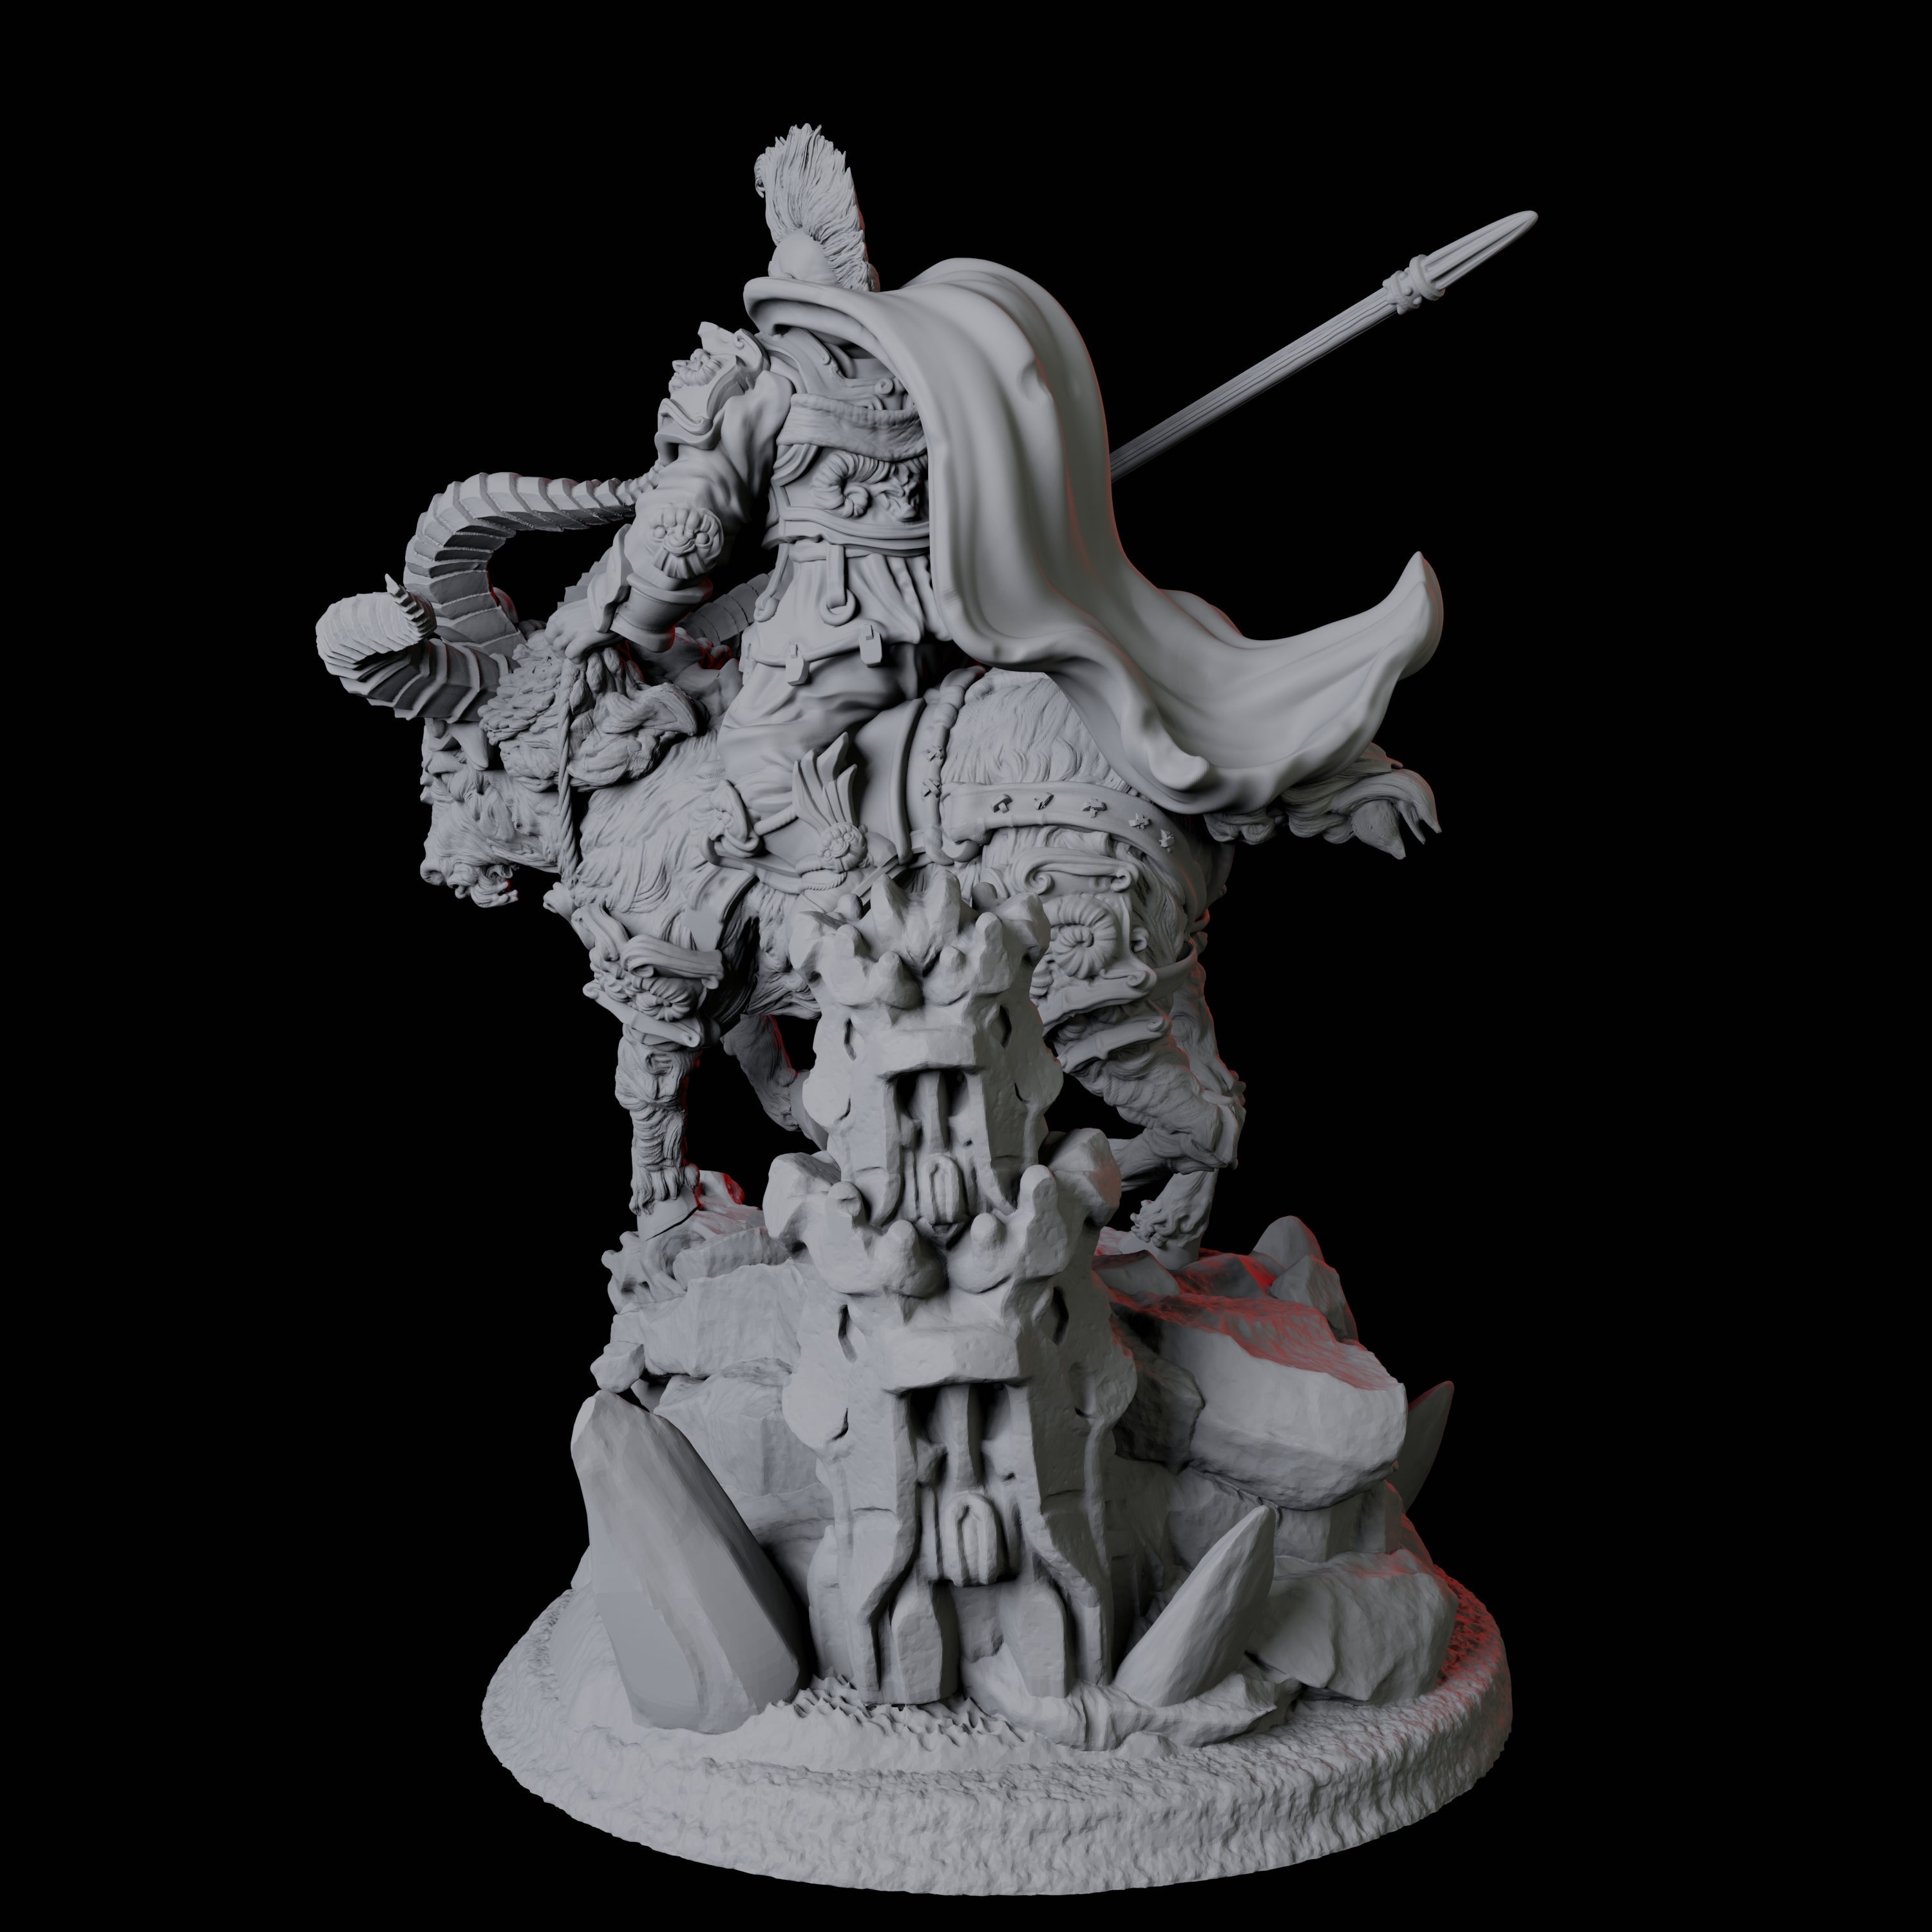 Goat Mounted Dwarf Warrior C Miniature for Dungeons and Dragons, Pathfinder or other TTRPGs